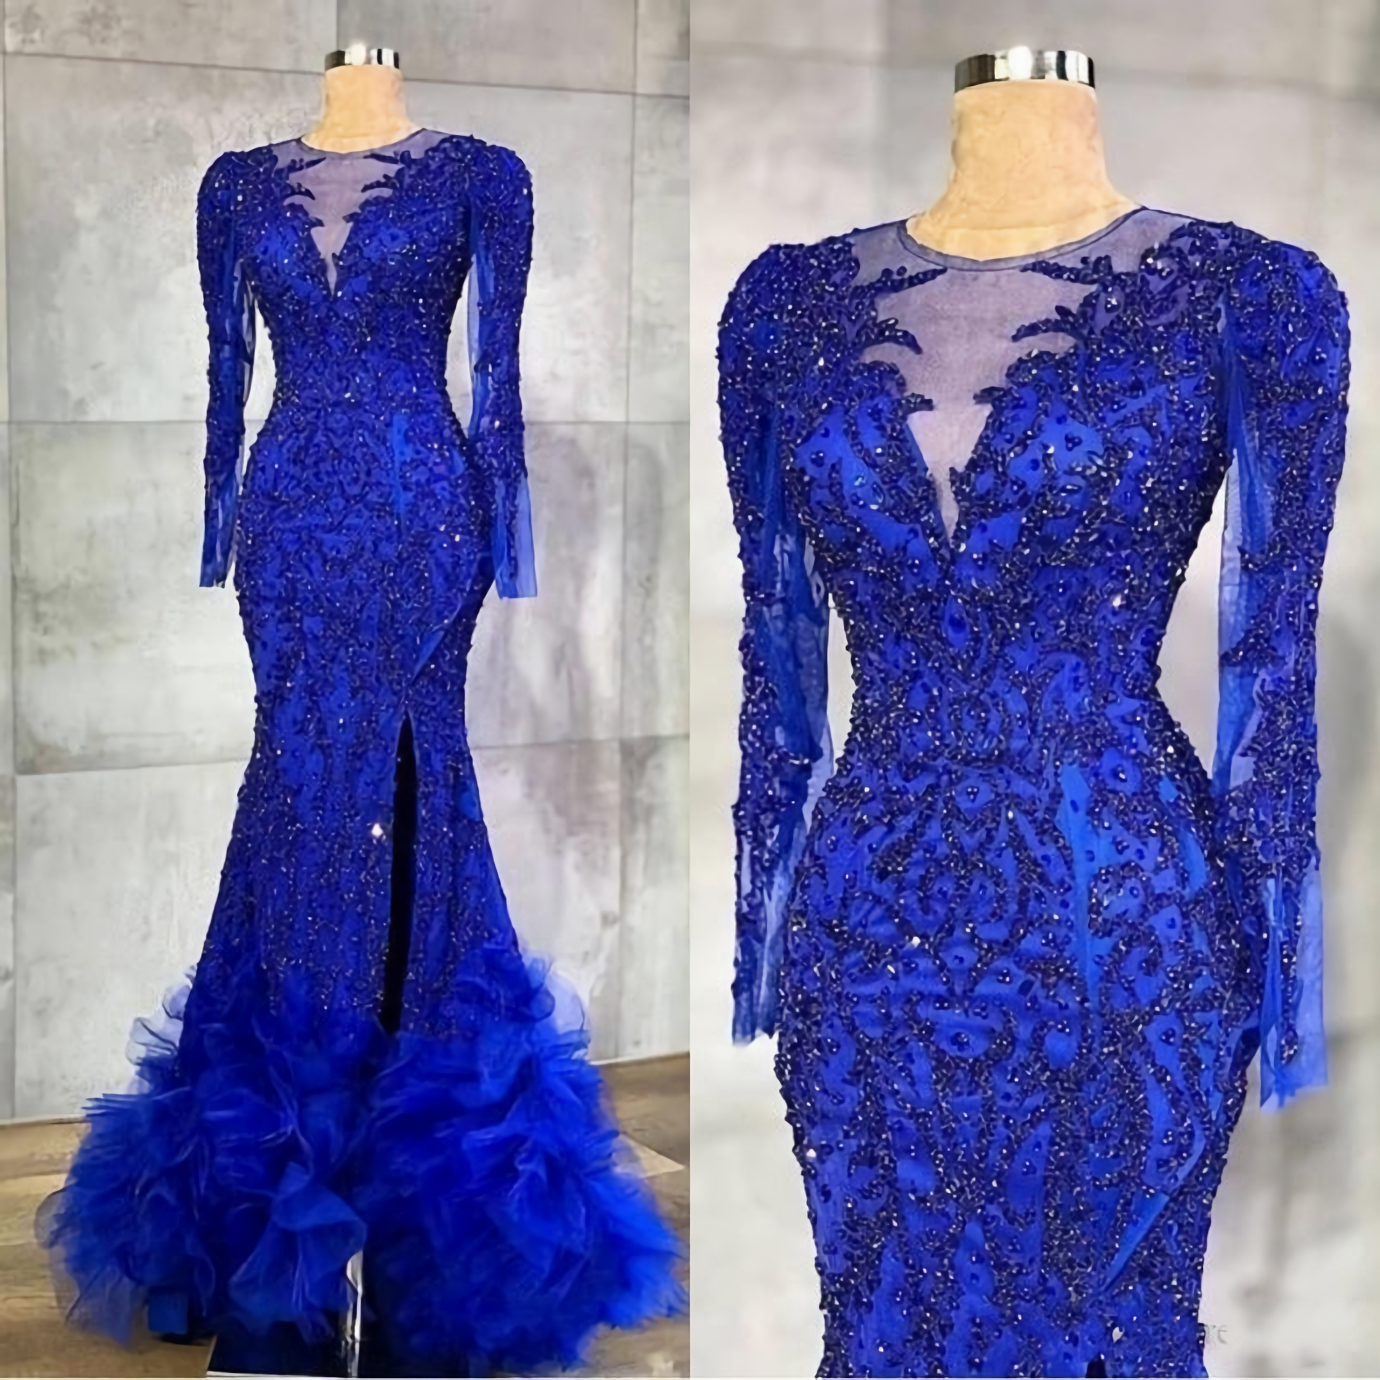 Long Corset Prom Dress, Luxury Royal Blue Evening Dresses, Beaded Crystals Sheer Neck Mermaid Arabic Aso Ebi Party Gowns Outfits, Prom Dresses On Sale